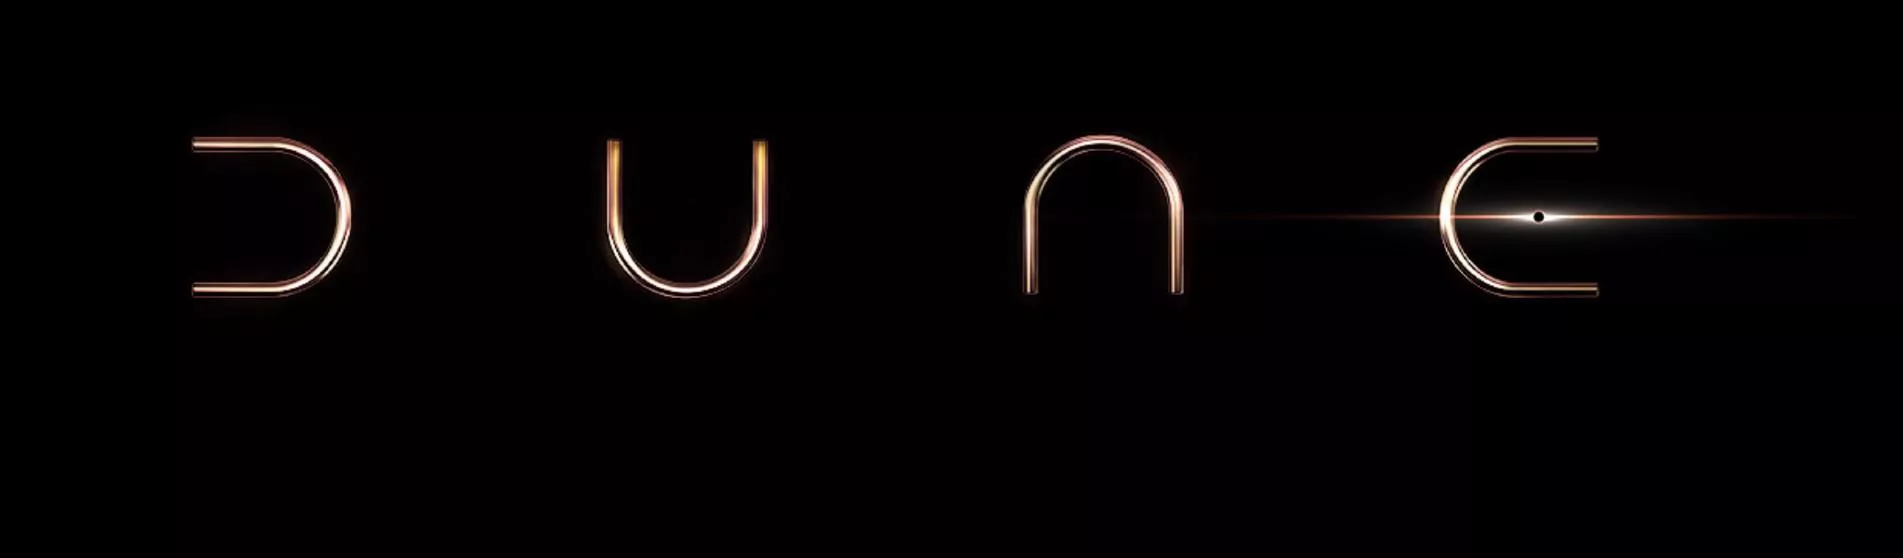 Letters D U N E showing on a black background, it is the logo of the film Dune released in 2021.